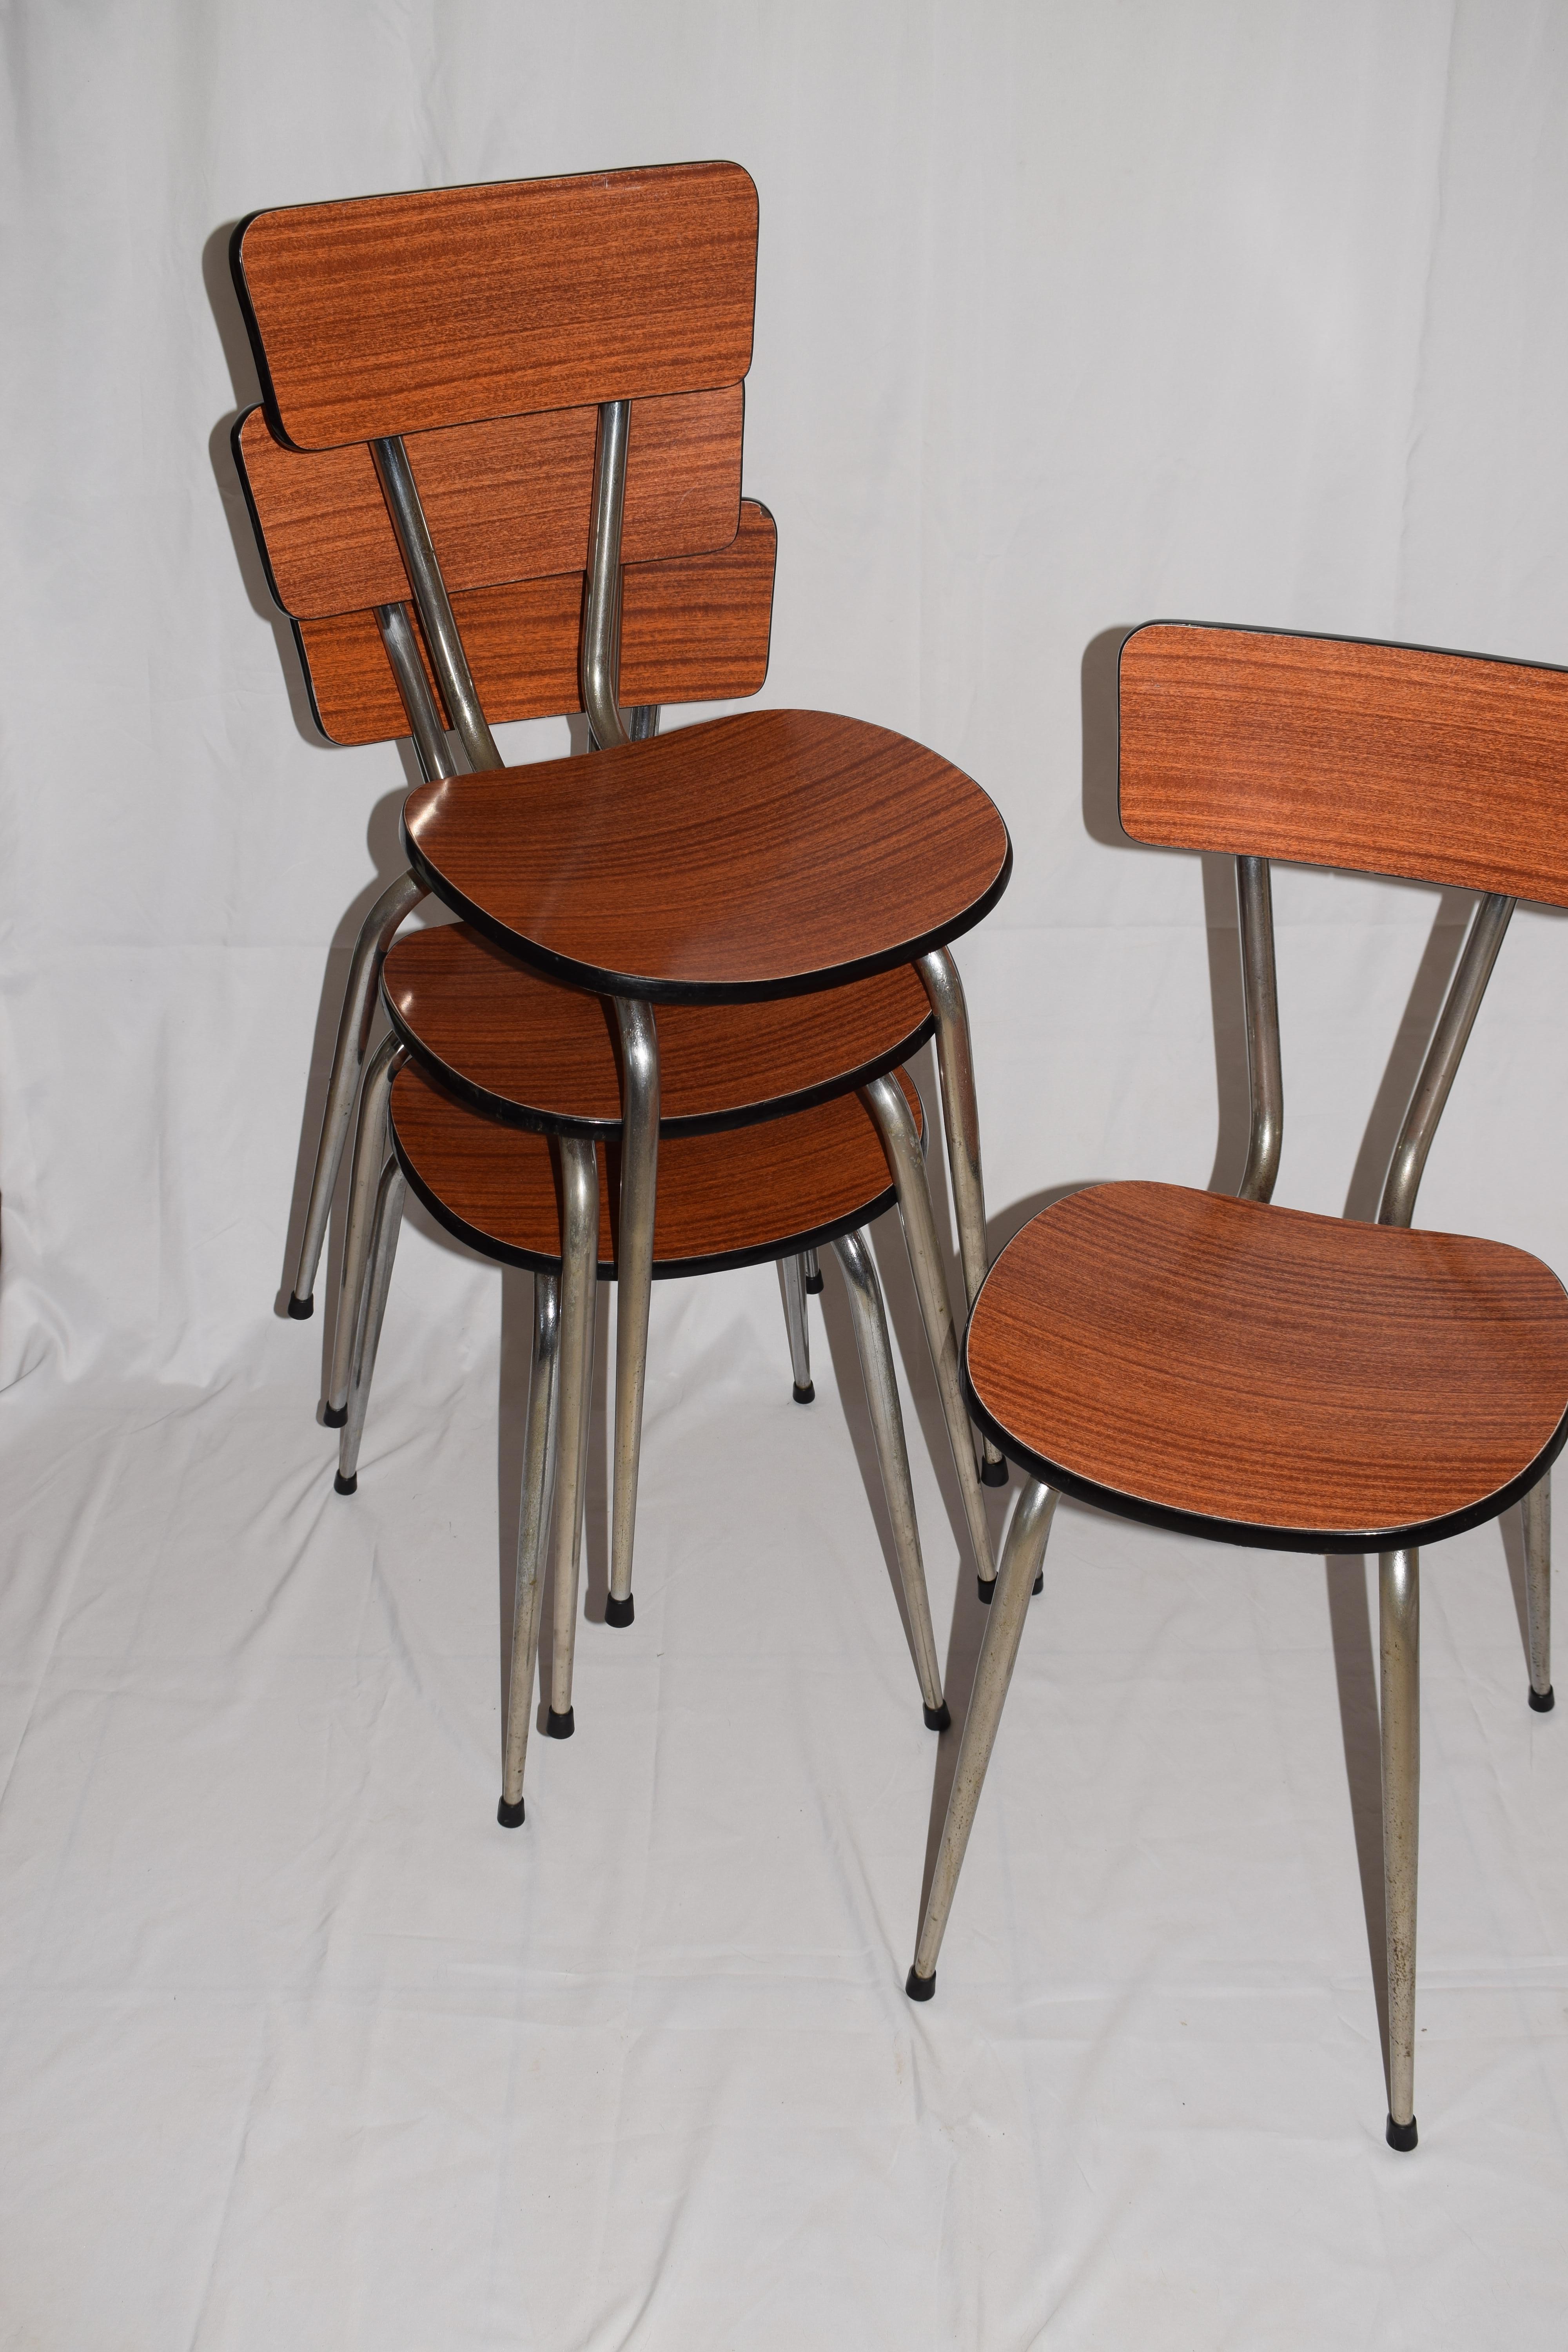 A set of four French Formica respoal dining chairs with chrome metal frames. From the 1960s they are iconic furniture from this age. The chrome legs are tapered. A retro piece of design - would look great in any home. All chairs are in a good